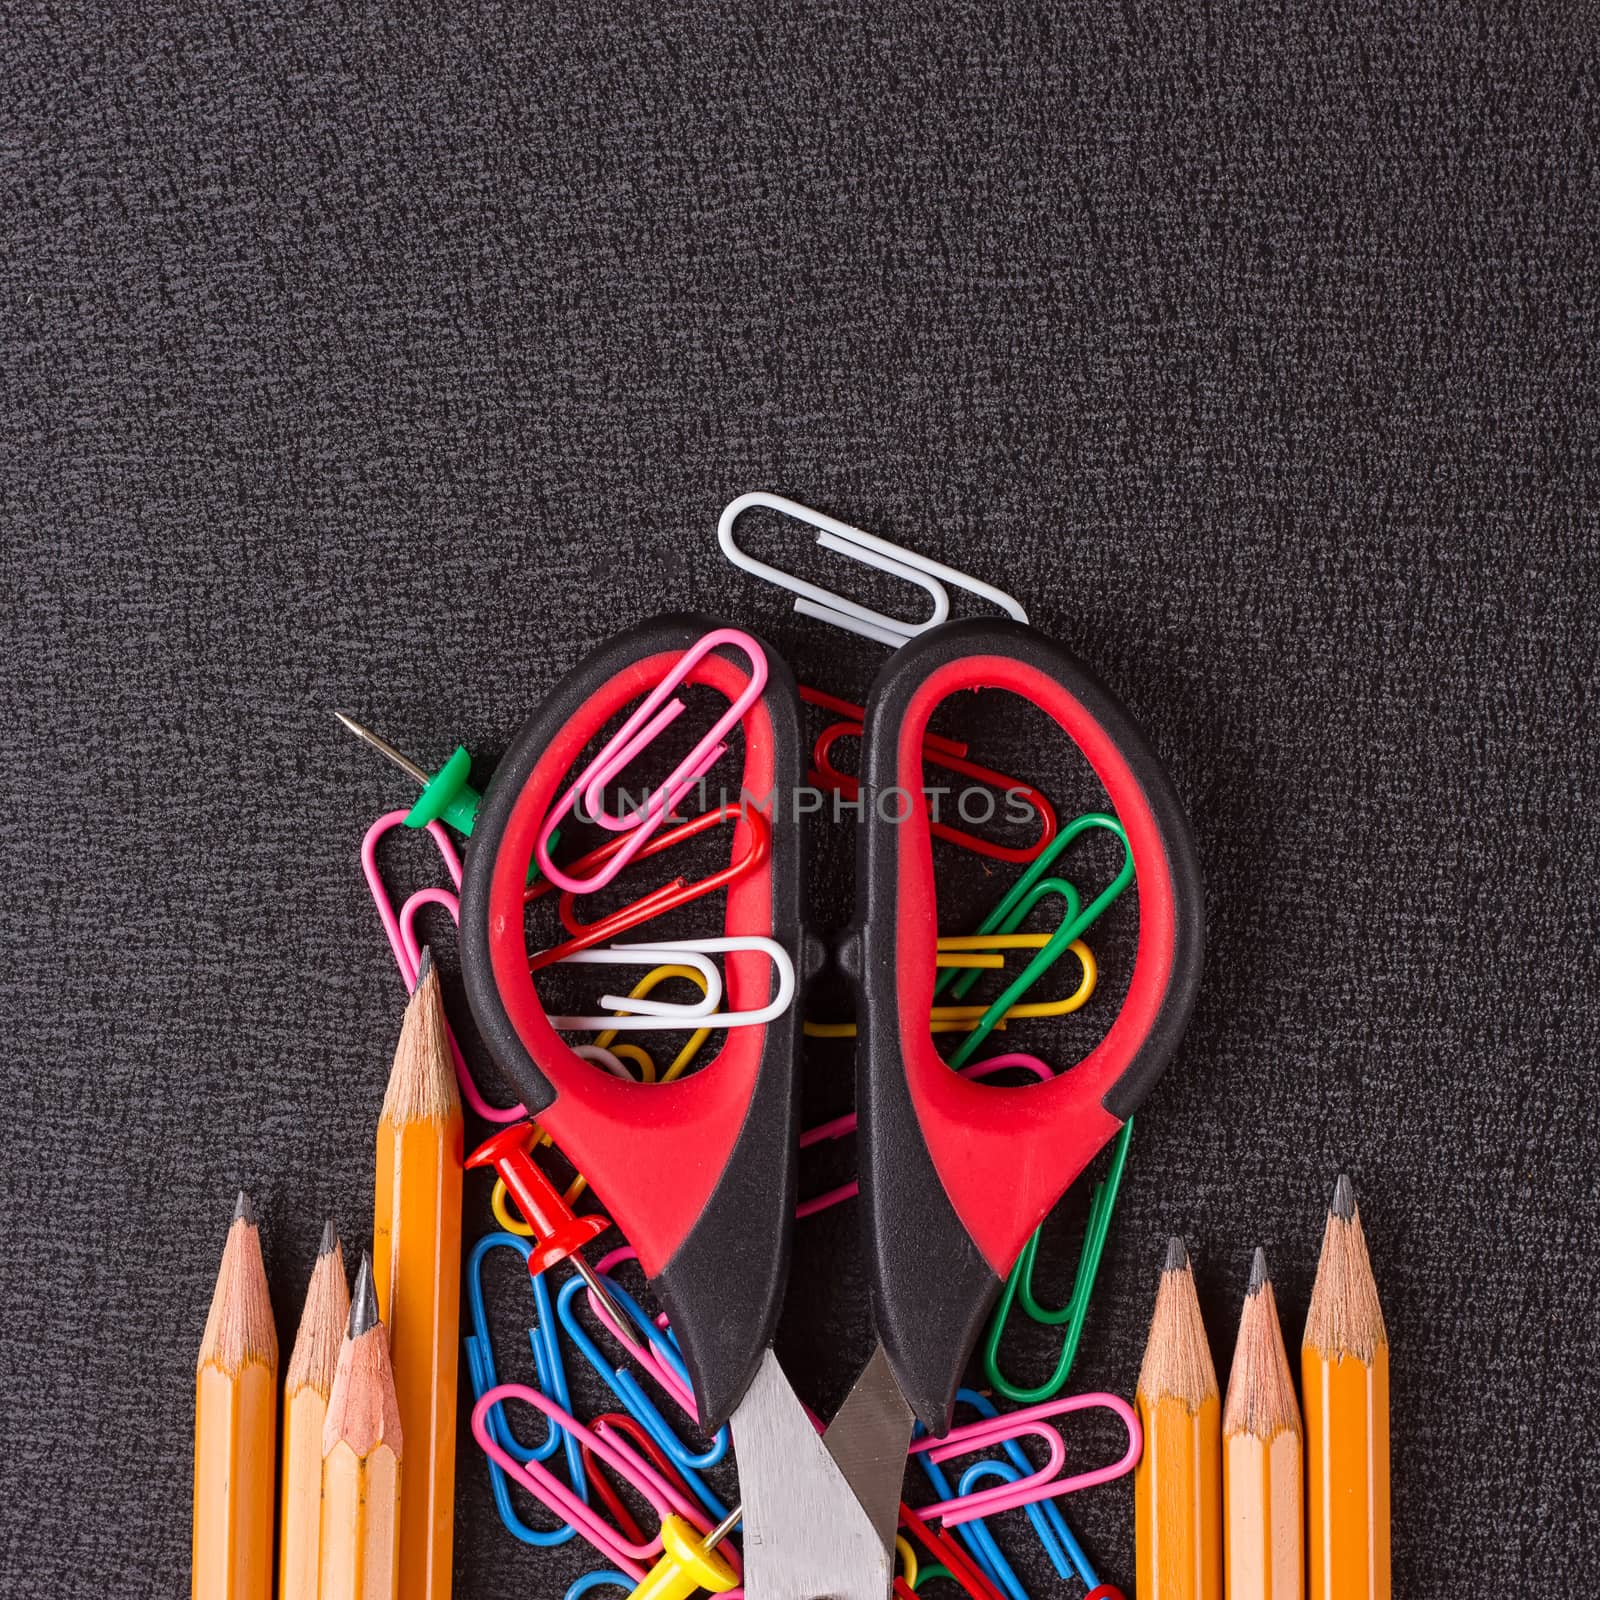 school supplies, stationery accessories on black background by victosha